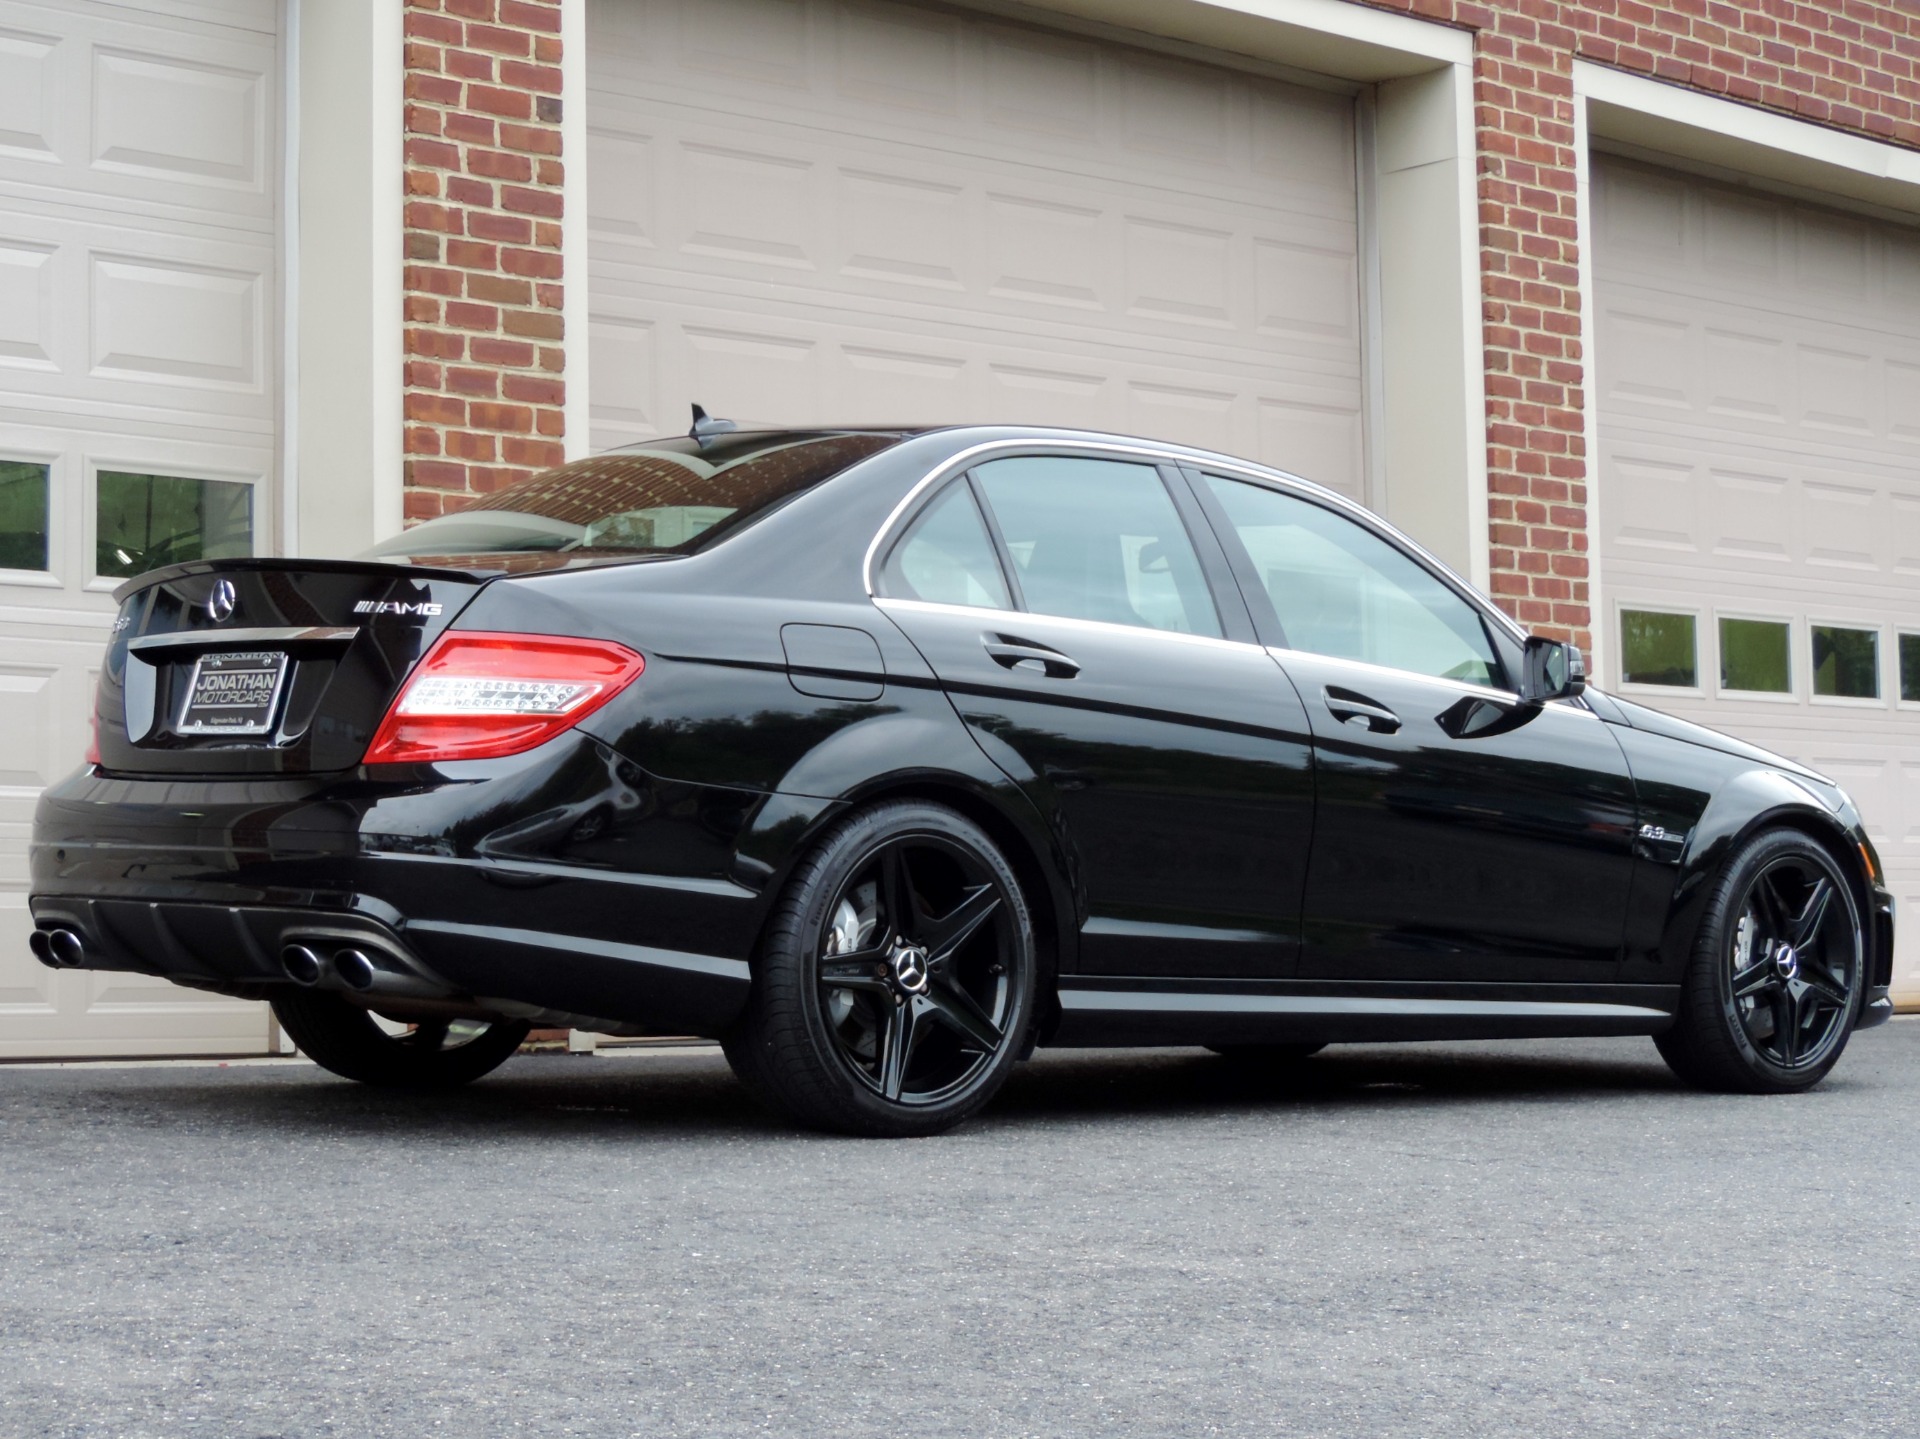 2010 Mercedes-Benz C-Class C 63 AMG Stock # 441875 for sale near